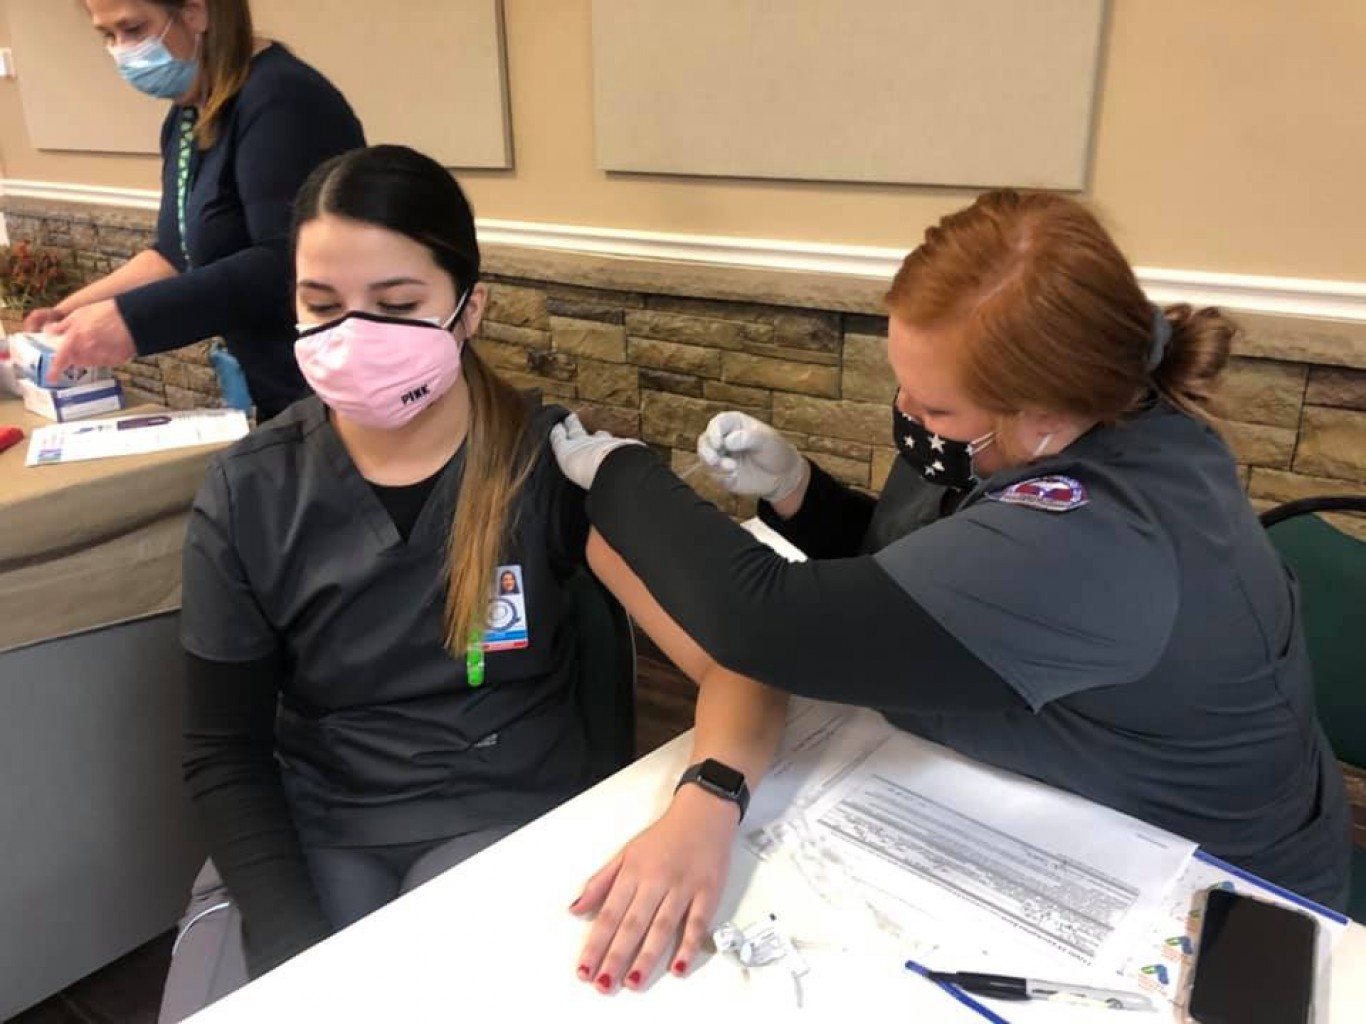 Oklahoma CareerTech nursing students help with COVID-19 vaccines and testing